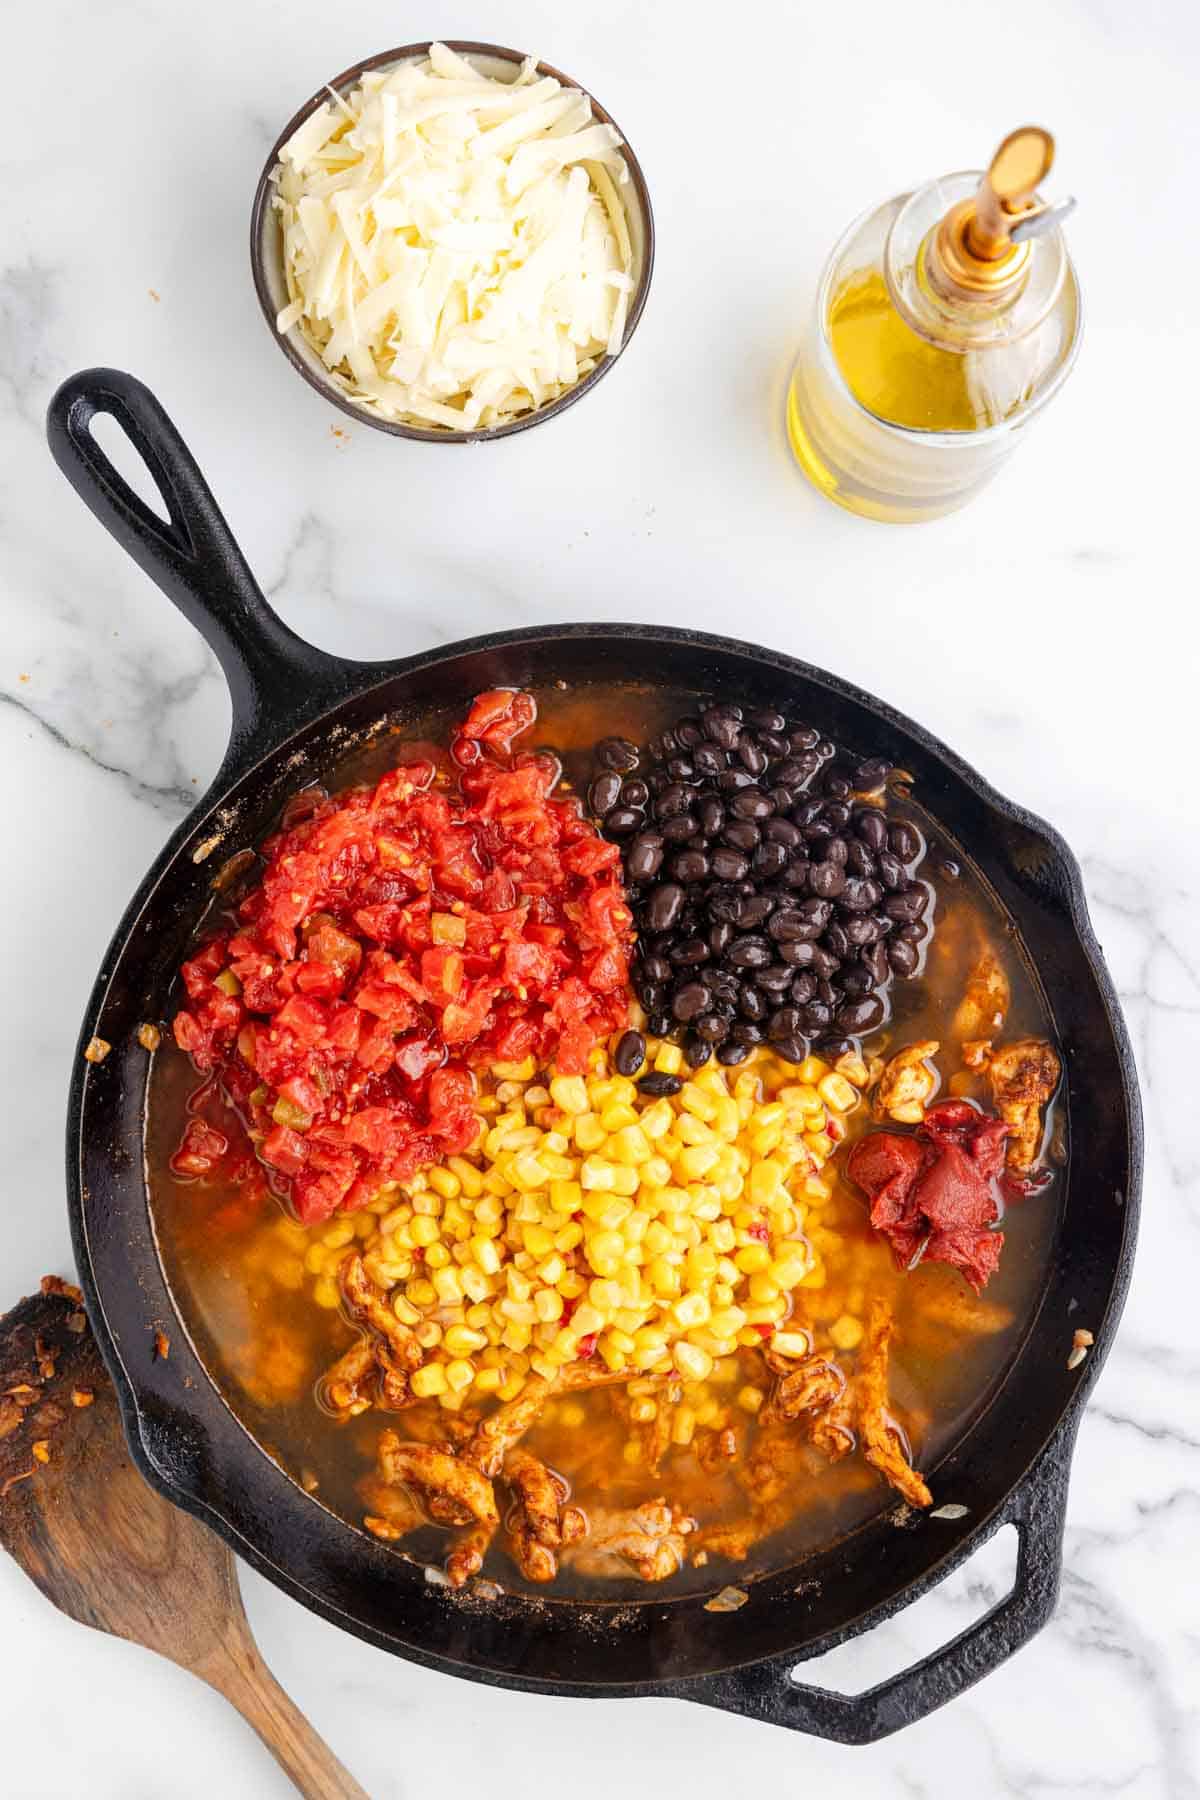 Rotel, corn and black beans added to skillet with broth and chicken mixture